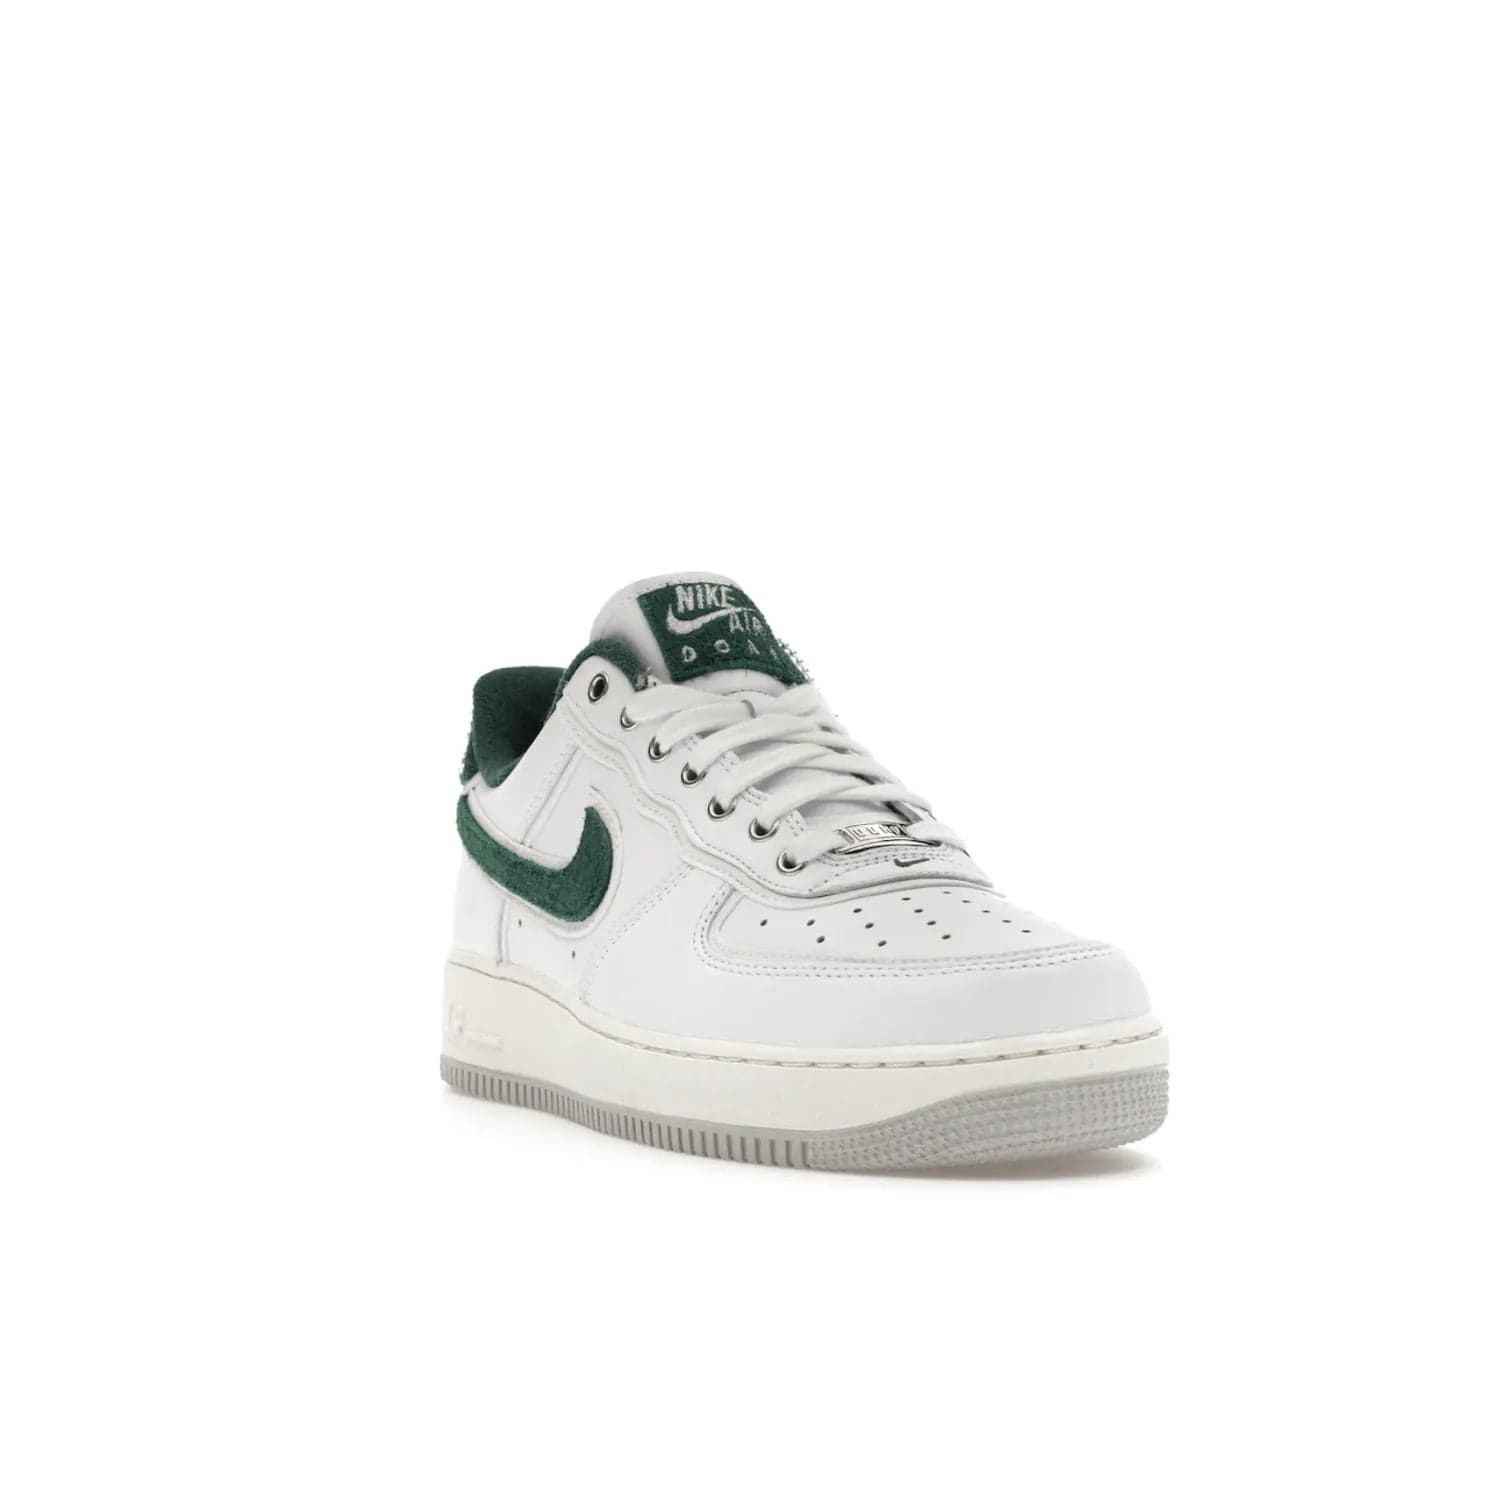 Nike Air Force 1 Low '07 Premium University of Oregon PE - Image 7 - Only at www.BallersClubKickz.com - The Nike Air Force 1 Low '07 Premium. Special Oregon University colorway. White base with green and sail accents. Cushioned rubber midsole. Comfort and style. Support your school!